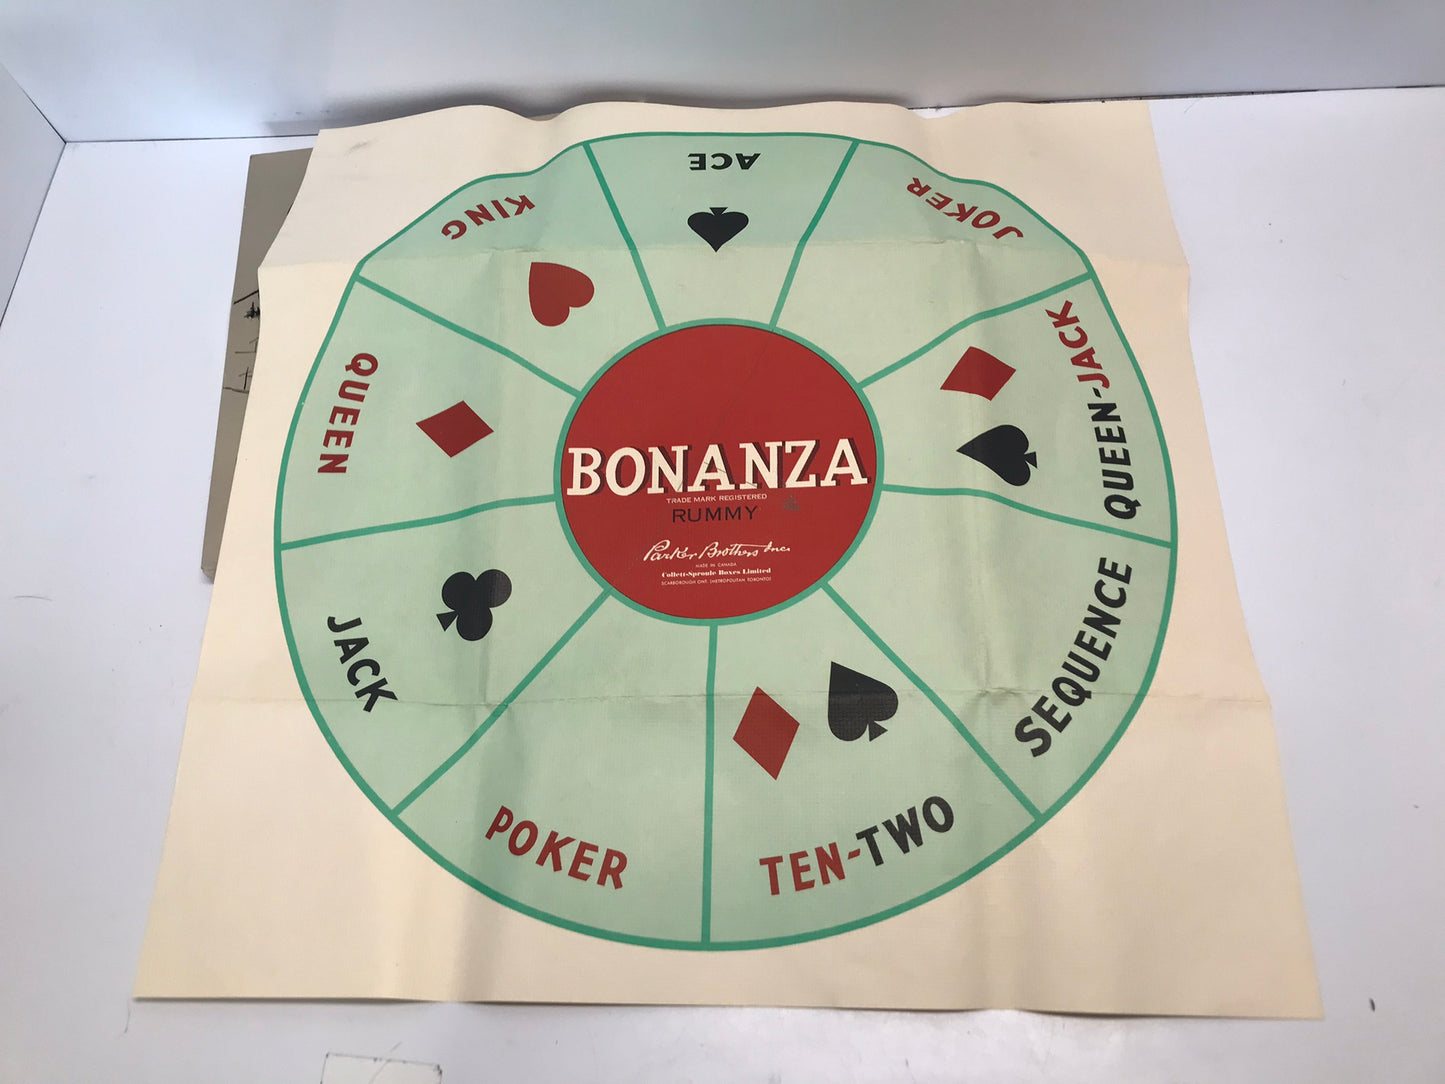 Game 1955 Rare Parkers Brothers Bonanza Rummy Excelent With Box